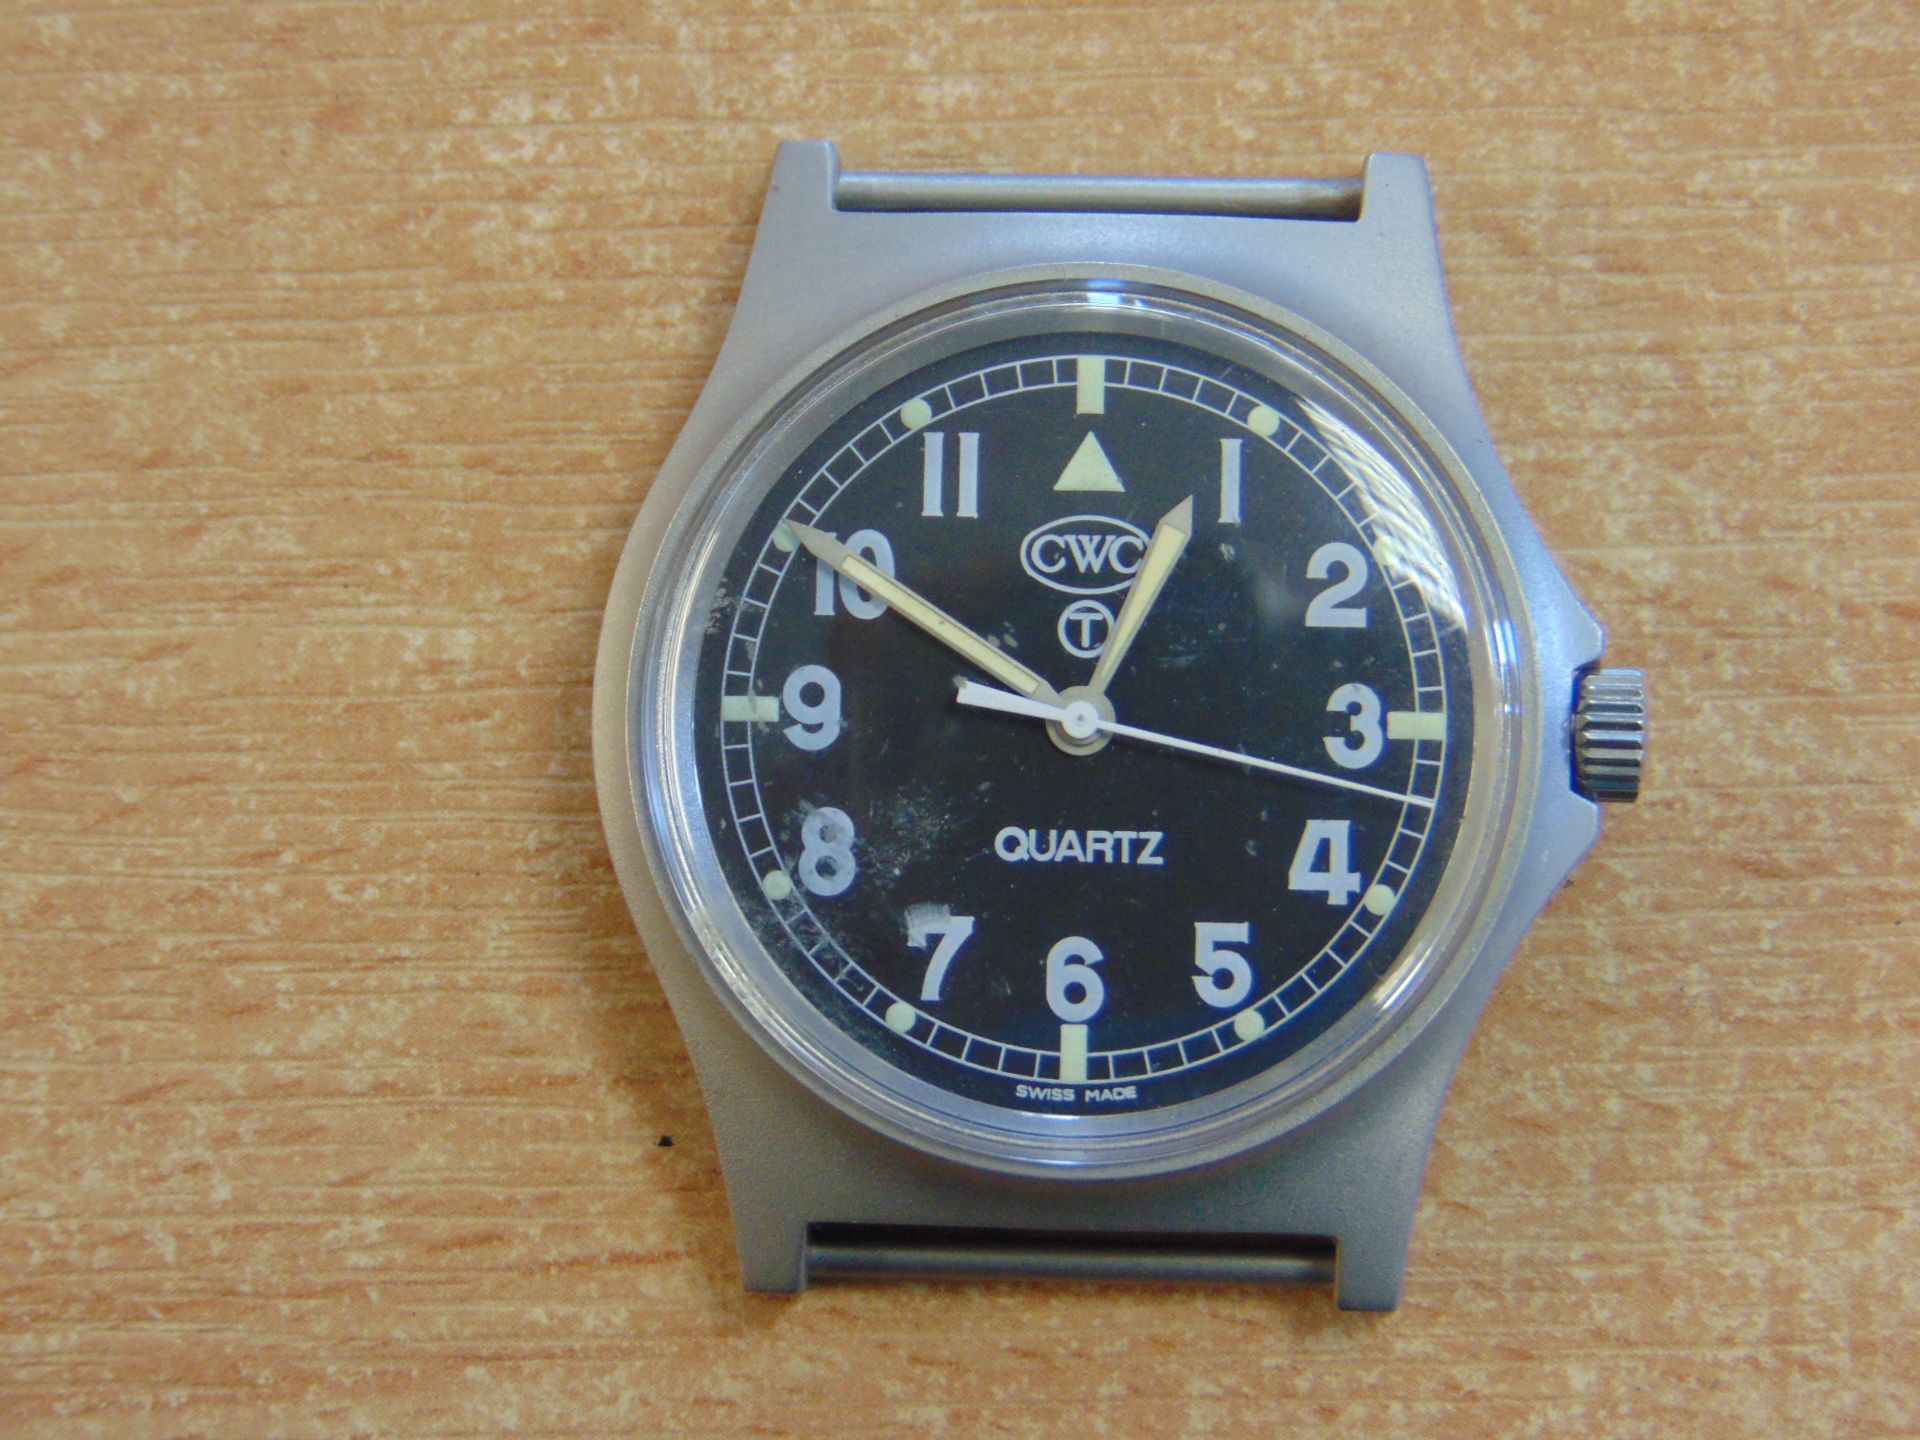 UNIQUE CWC 0552 ROYAL MARINES/ ROYAL NAVY ISSUE SERVICE WATCH DATED 1990 ** GULF WAR** SN.66054 - Image 3 of 9